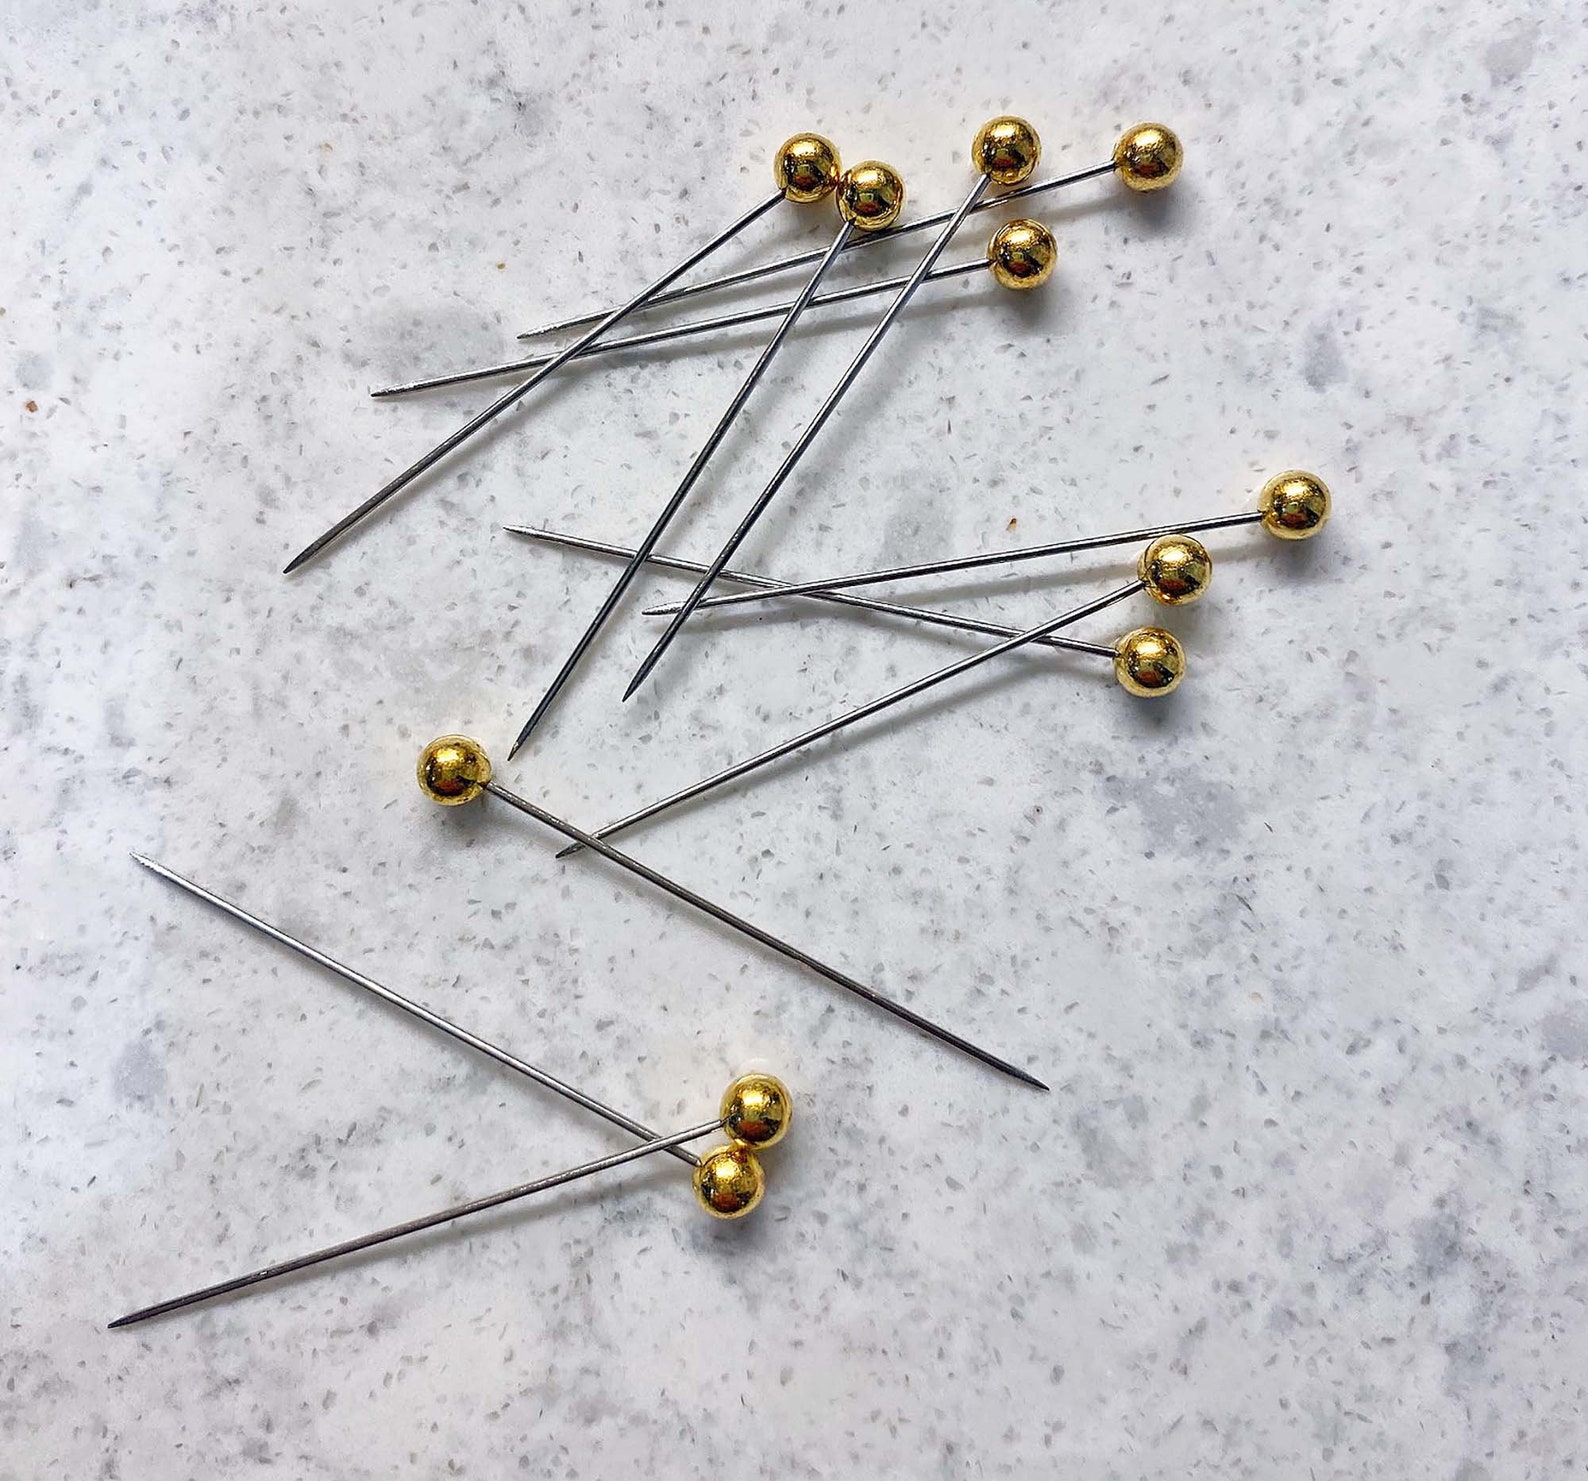 Metallic Gold Straight Pins For Quilting Sewing And Crafts 100 Etsy